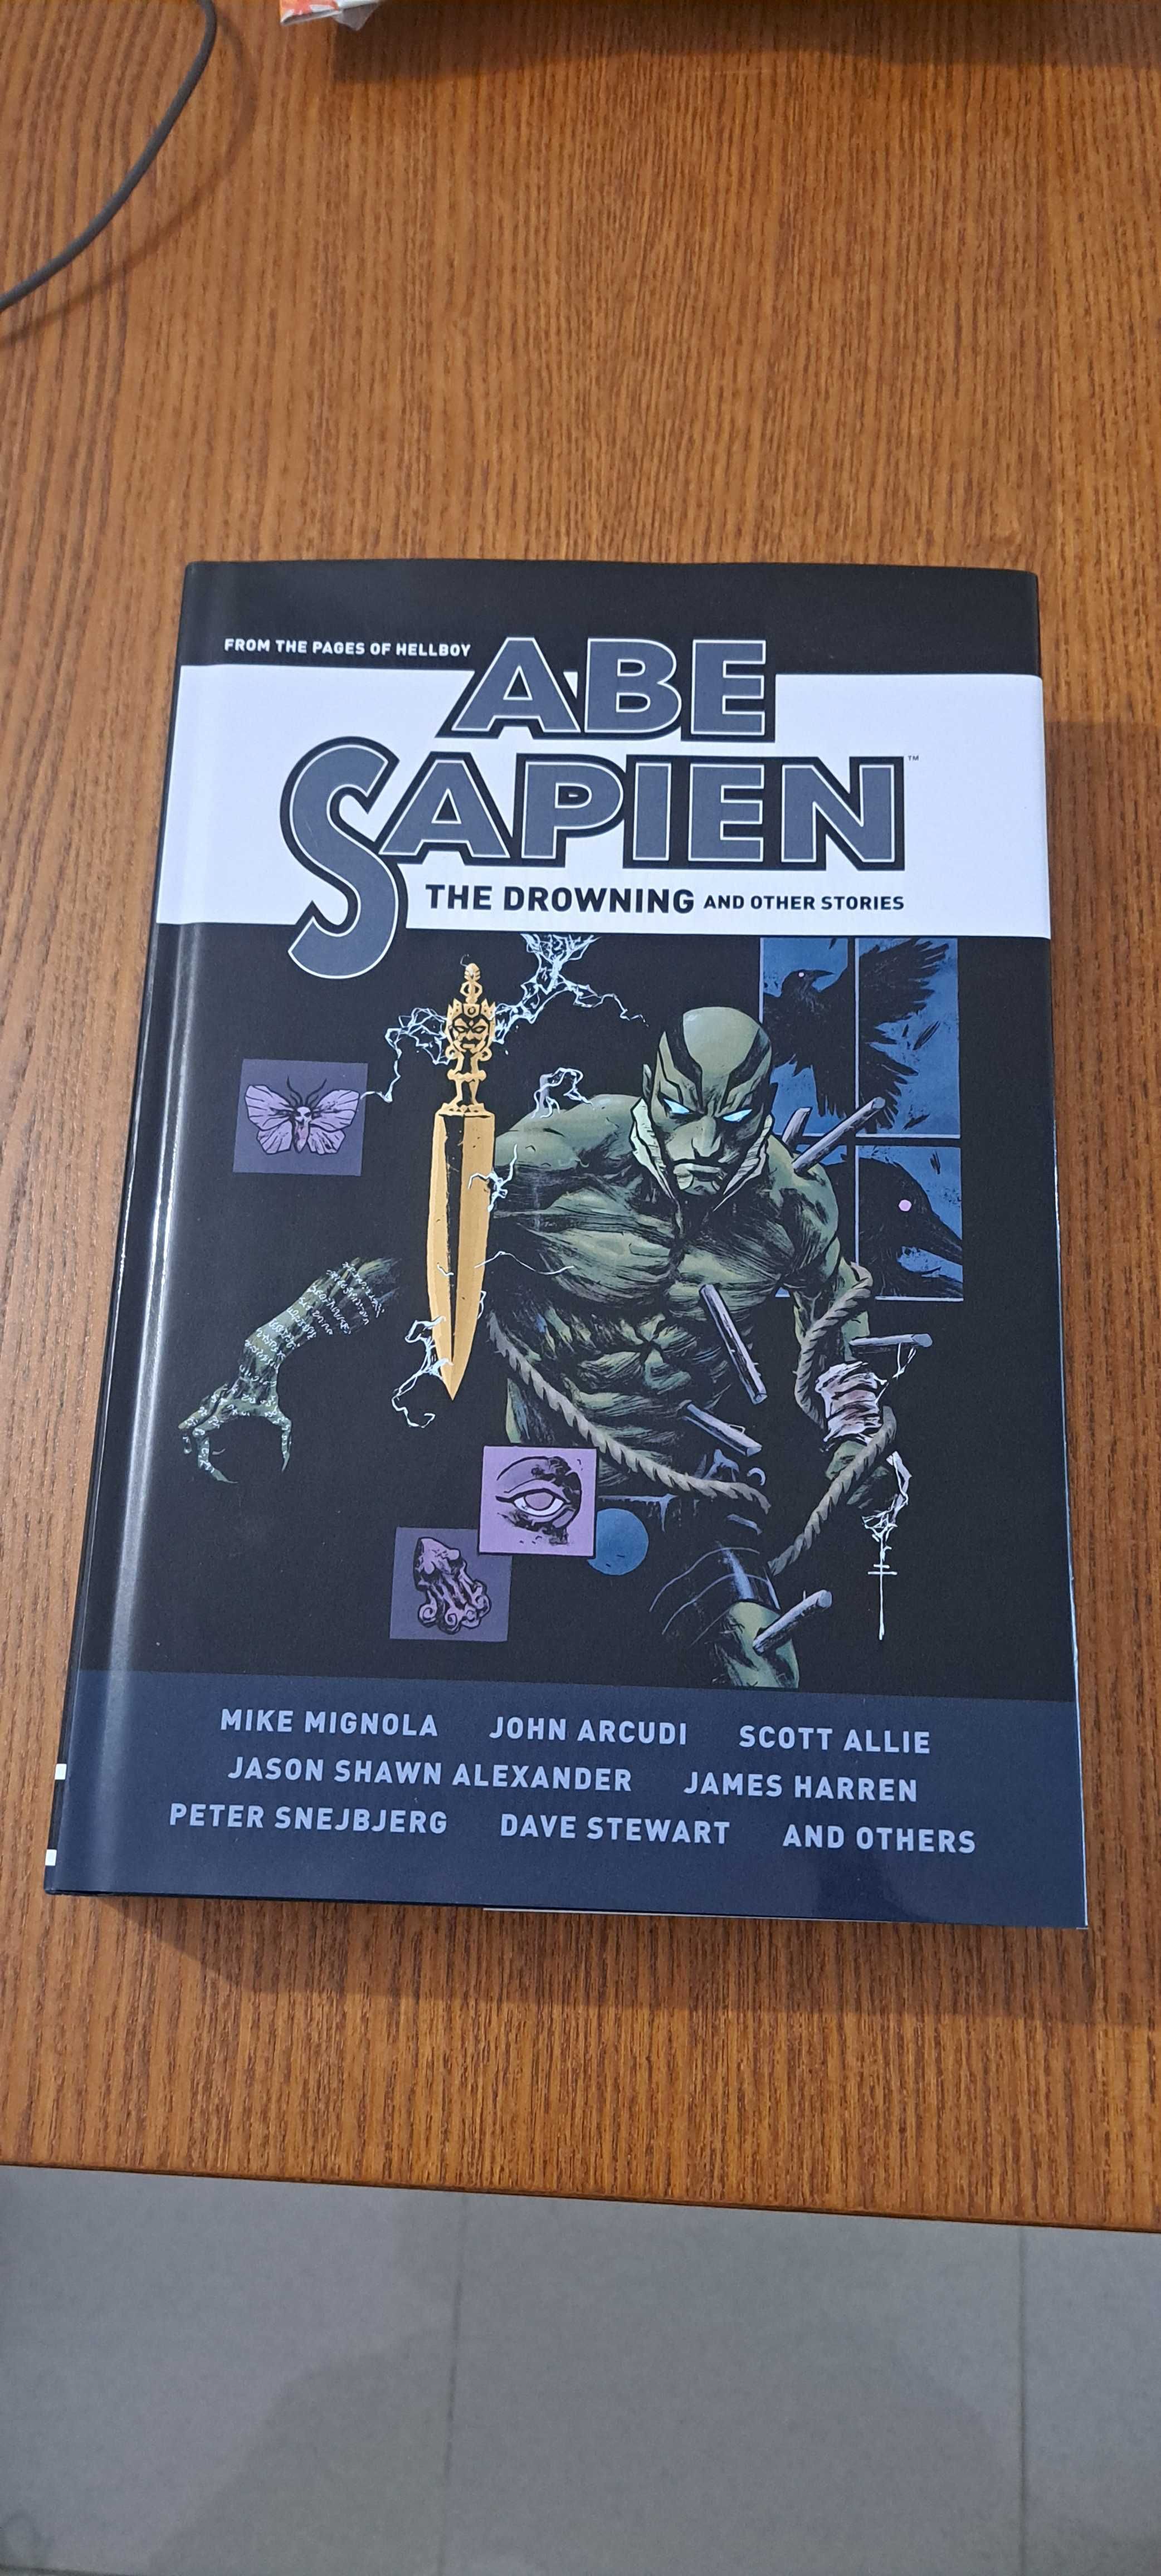 Abe Sapien the drowning and other stories omnibus hc